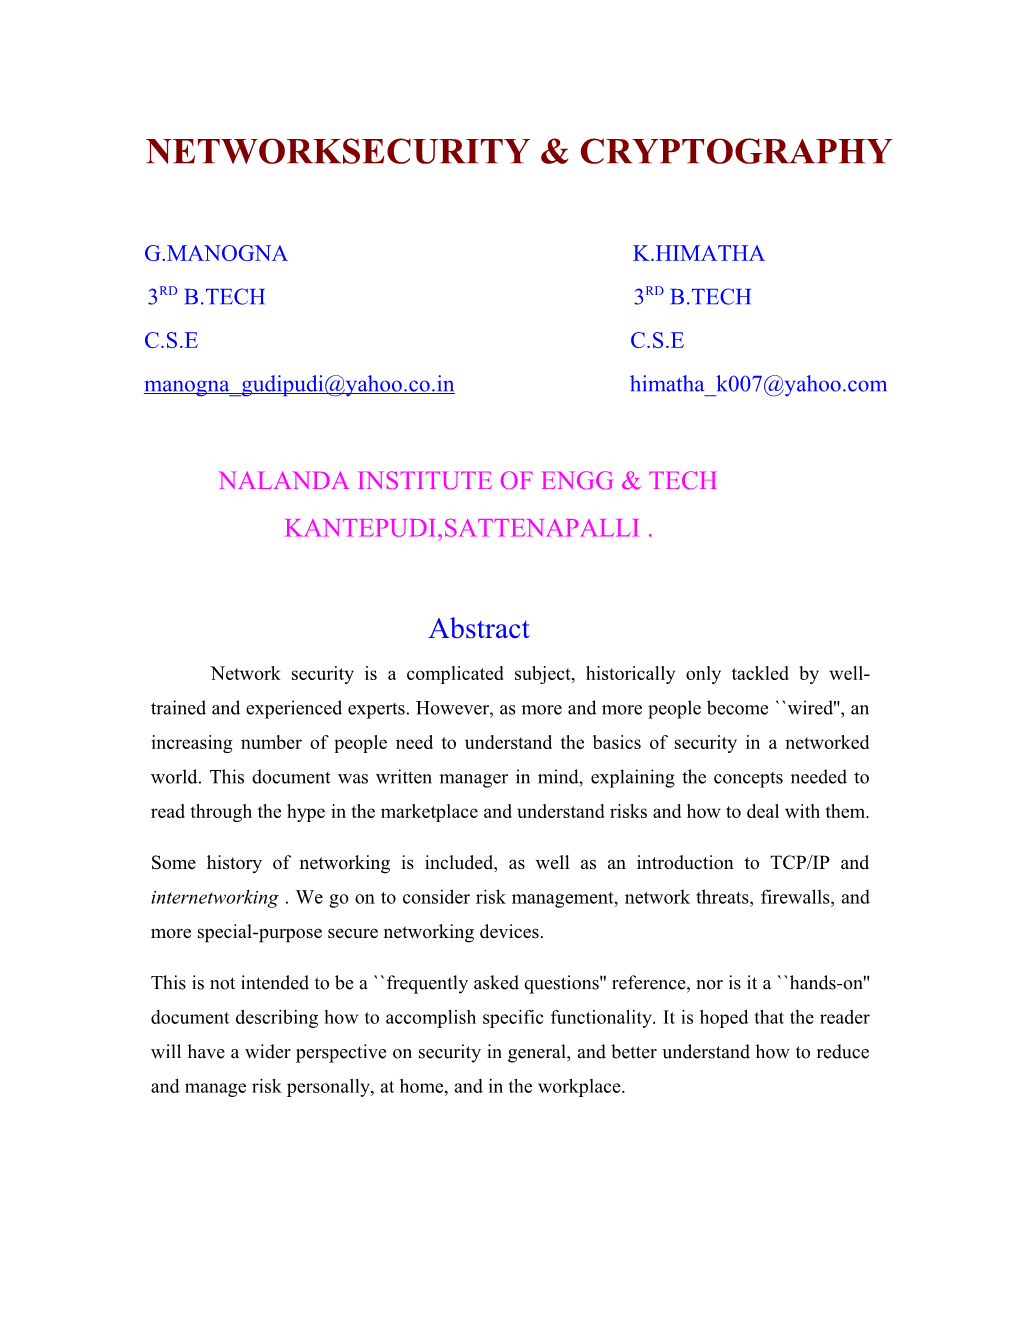 Networksecurity & Cryptography